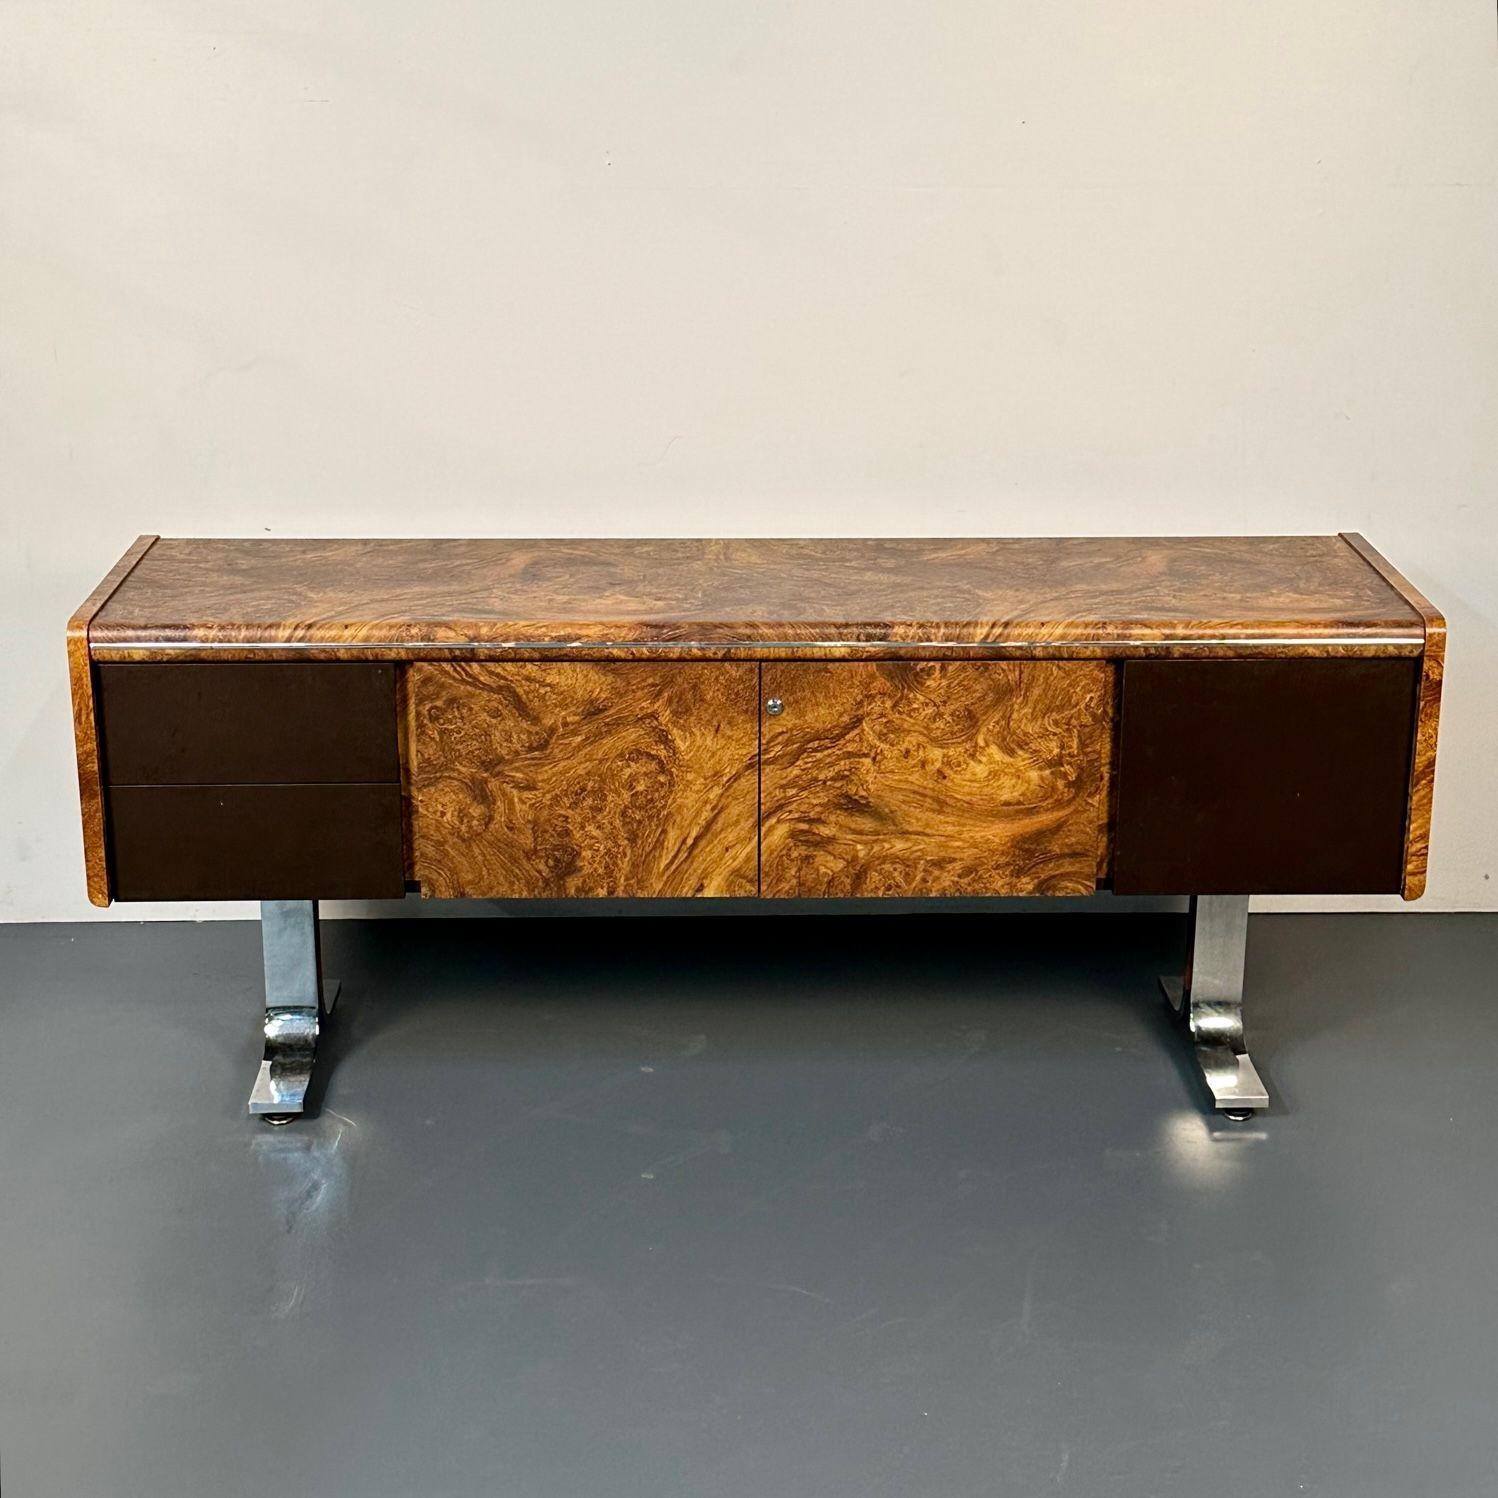 Mid-Century Modern Herman Miller Style Sideboard / Credenza / Cabinet, Burlwood
 
Mid-century cabinet with all original hardware and wood from the time period. This sideboard featured a curly burlwood case flanked by three drawers (one side having